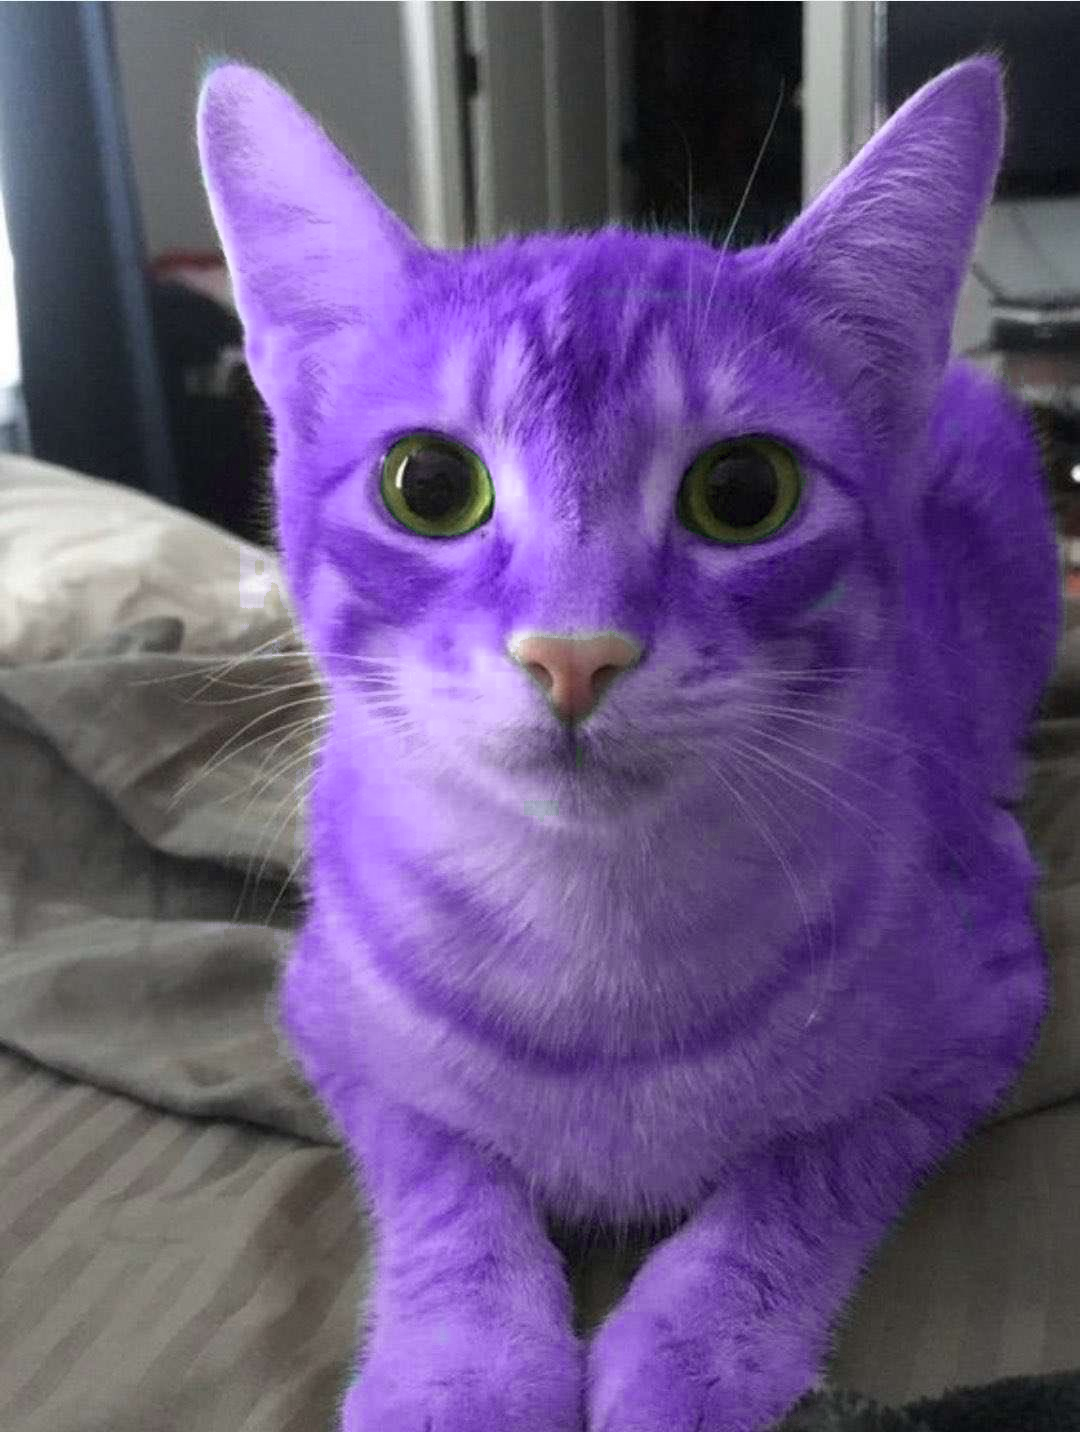 a cat, loafing, looking at the camera, edited to have purple fur